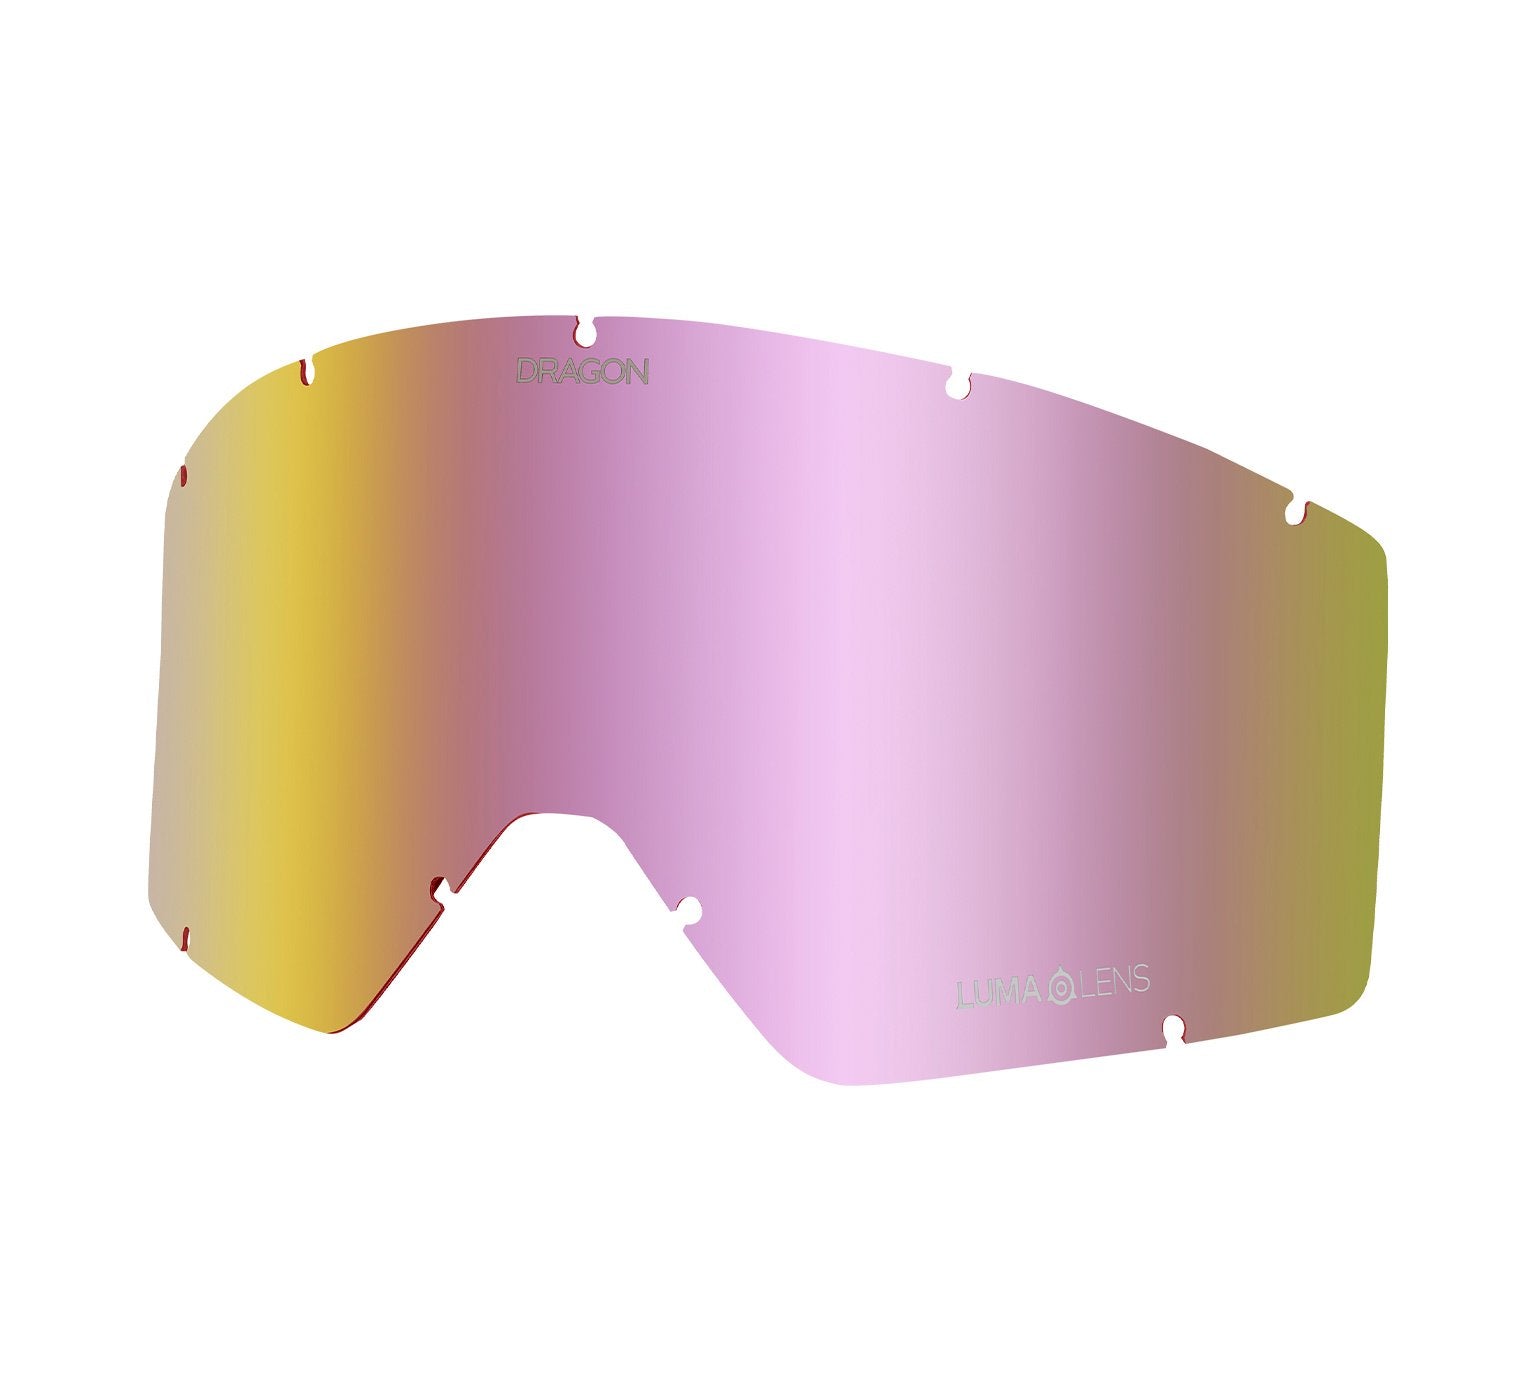 DX3 OTG Replacement Lens - Lumalens Pink Ionized